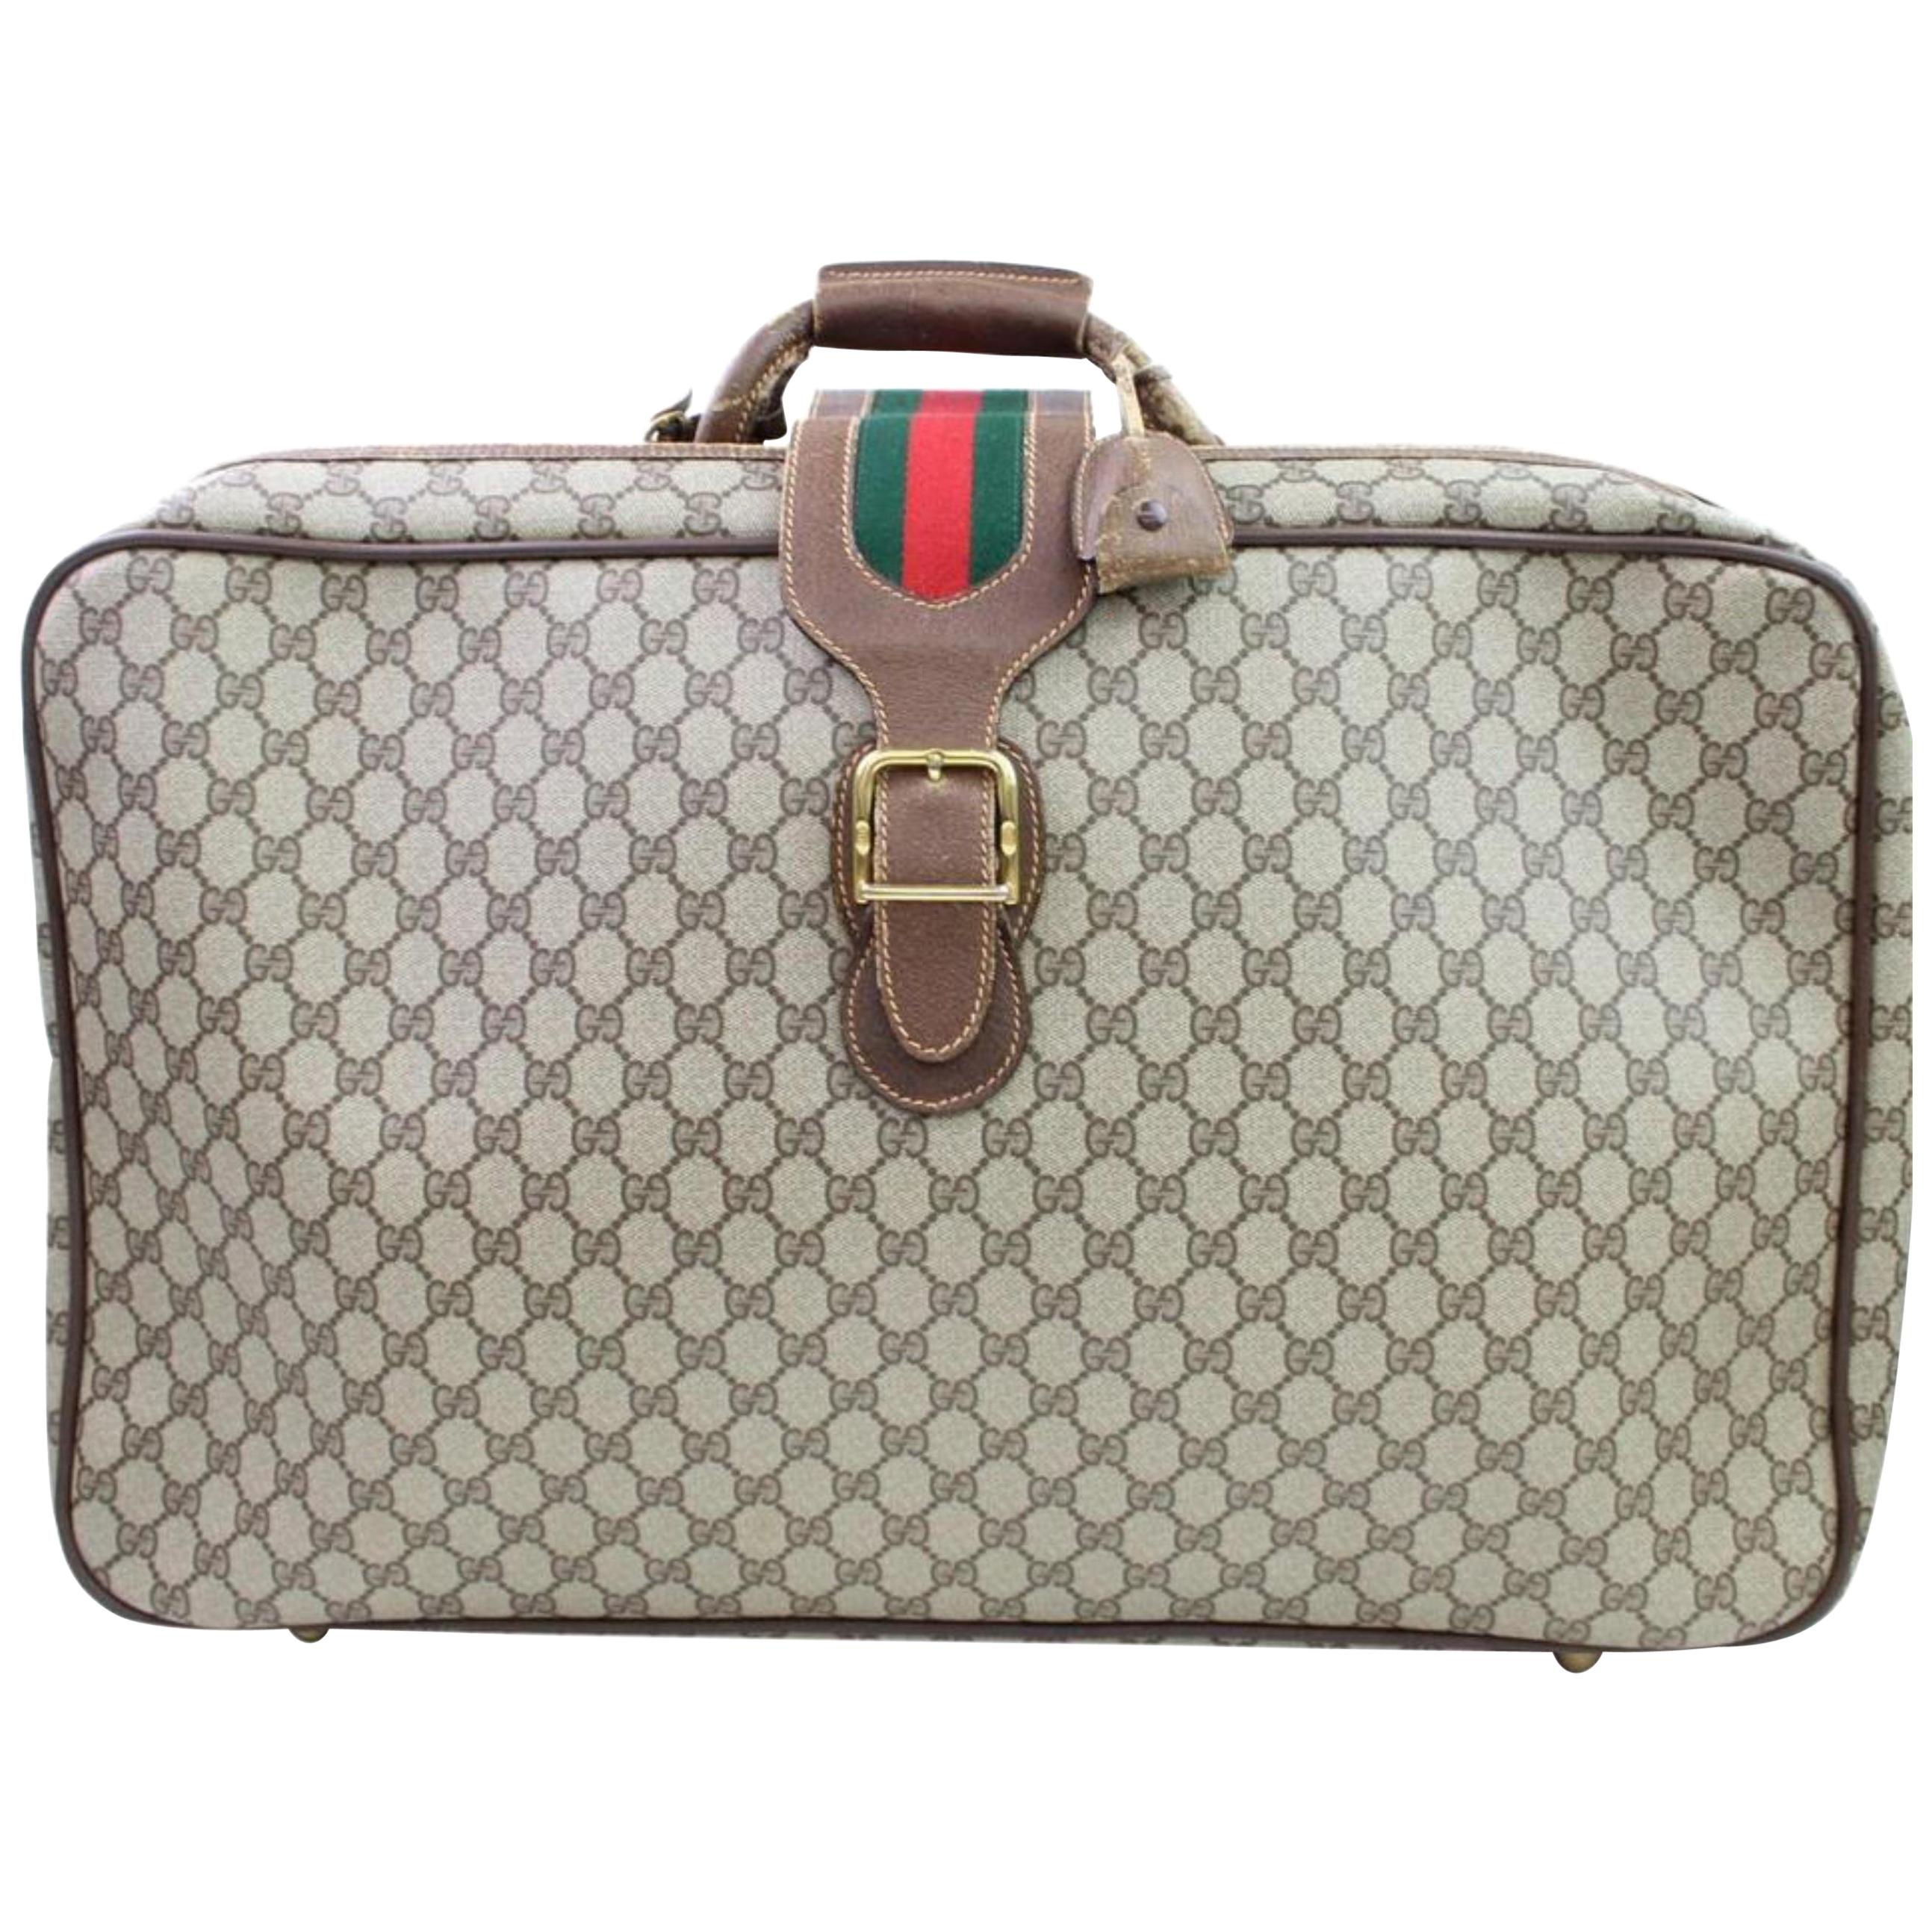 Gucci Sherry Web Supreme Suitcase 866636 Beige Coated Canvas Weekend/Travel Bag For Sale